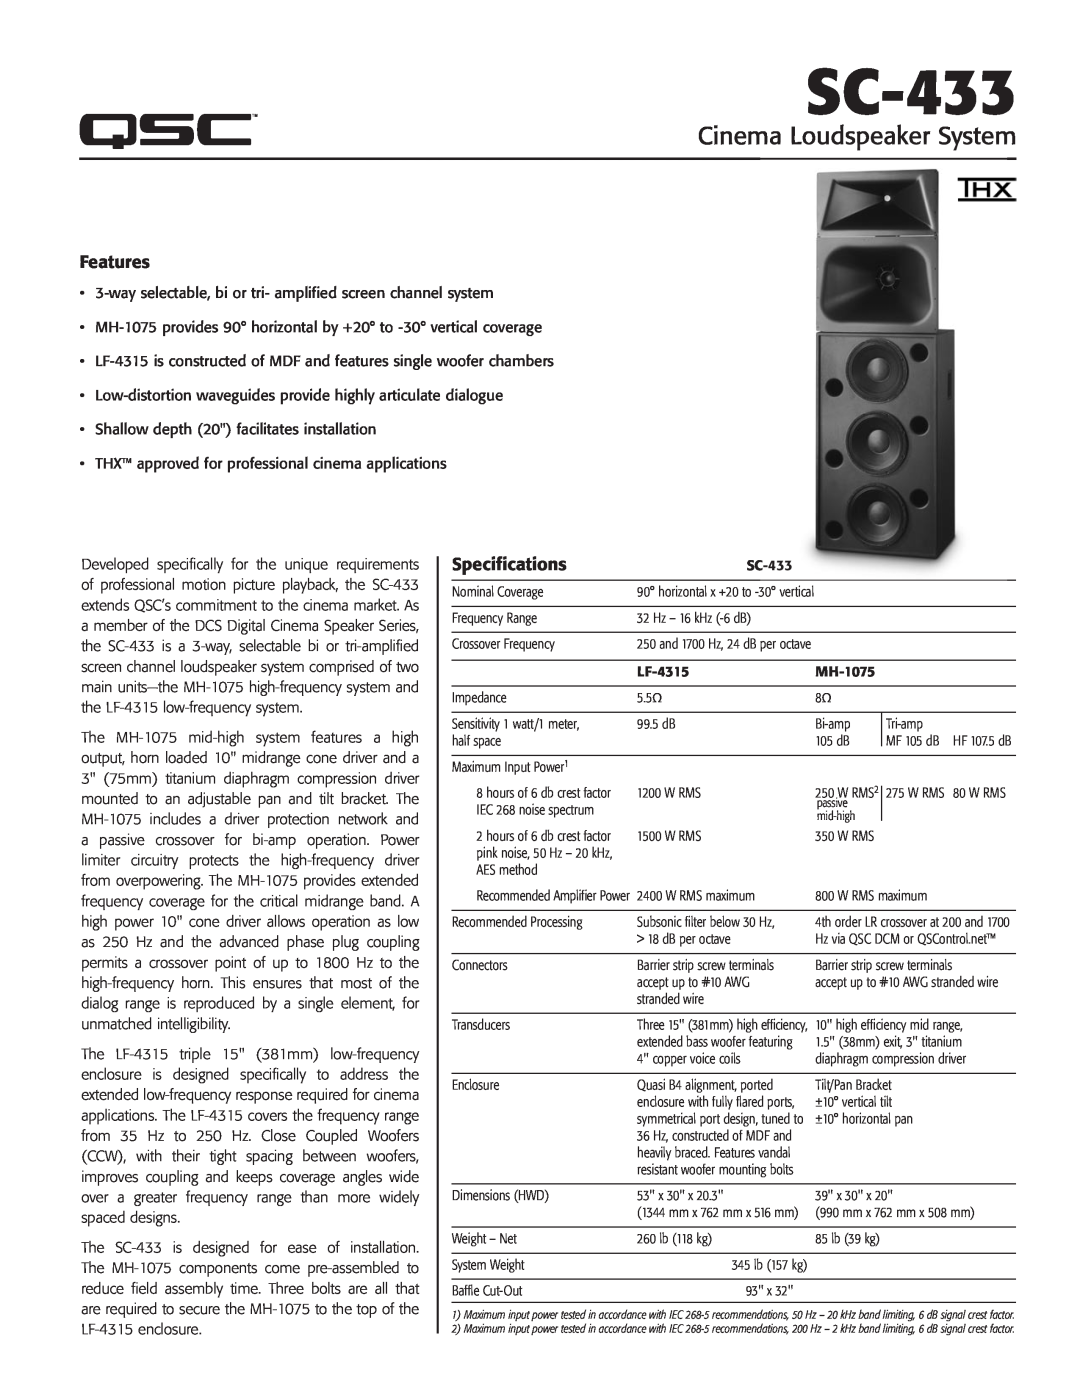 QSC Audio SC-433 specifications Features, Specifications, Cinema Loudspeaker System 